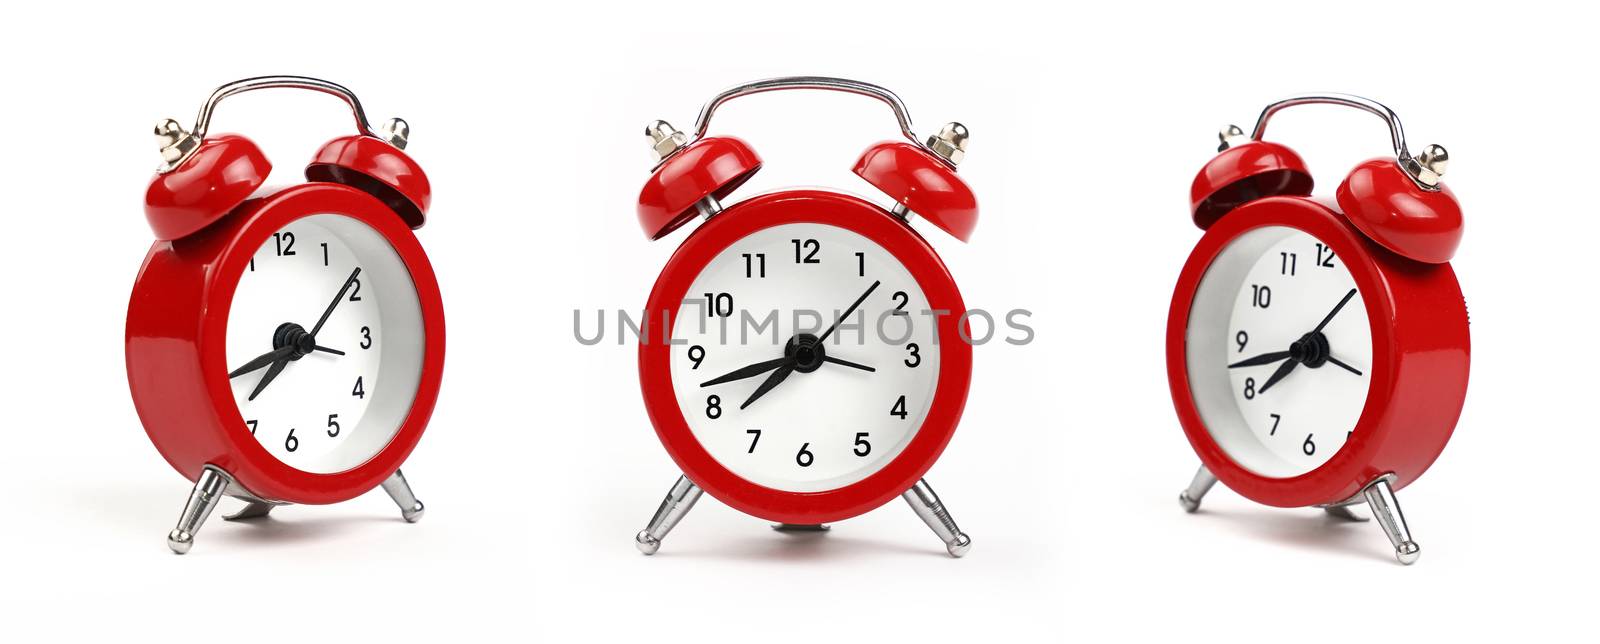 Three small red metal alarm clock with red bells over white background, close up, low angle view in different perspectives